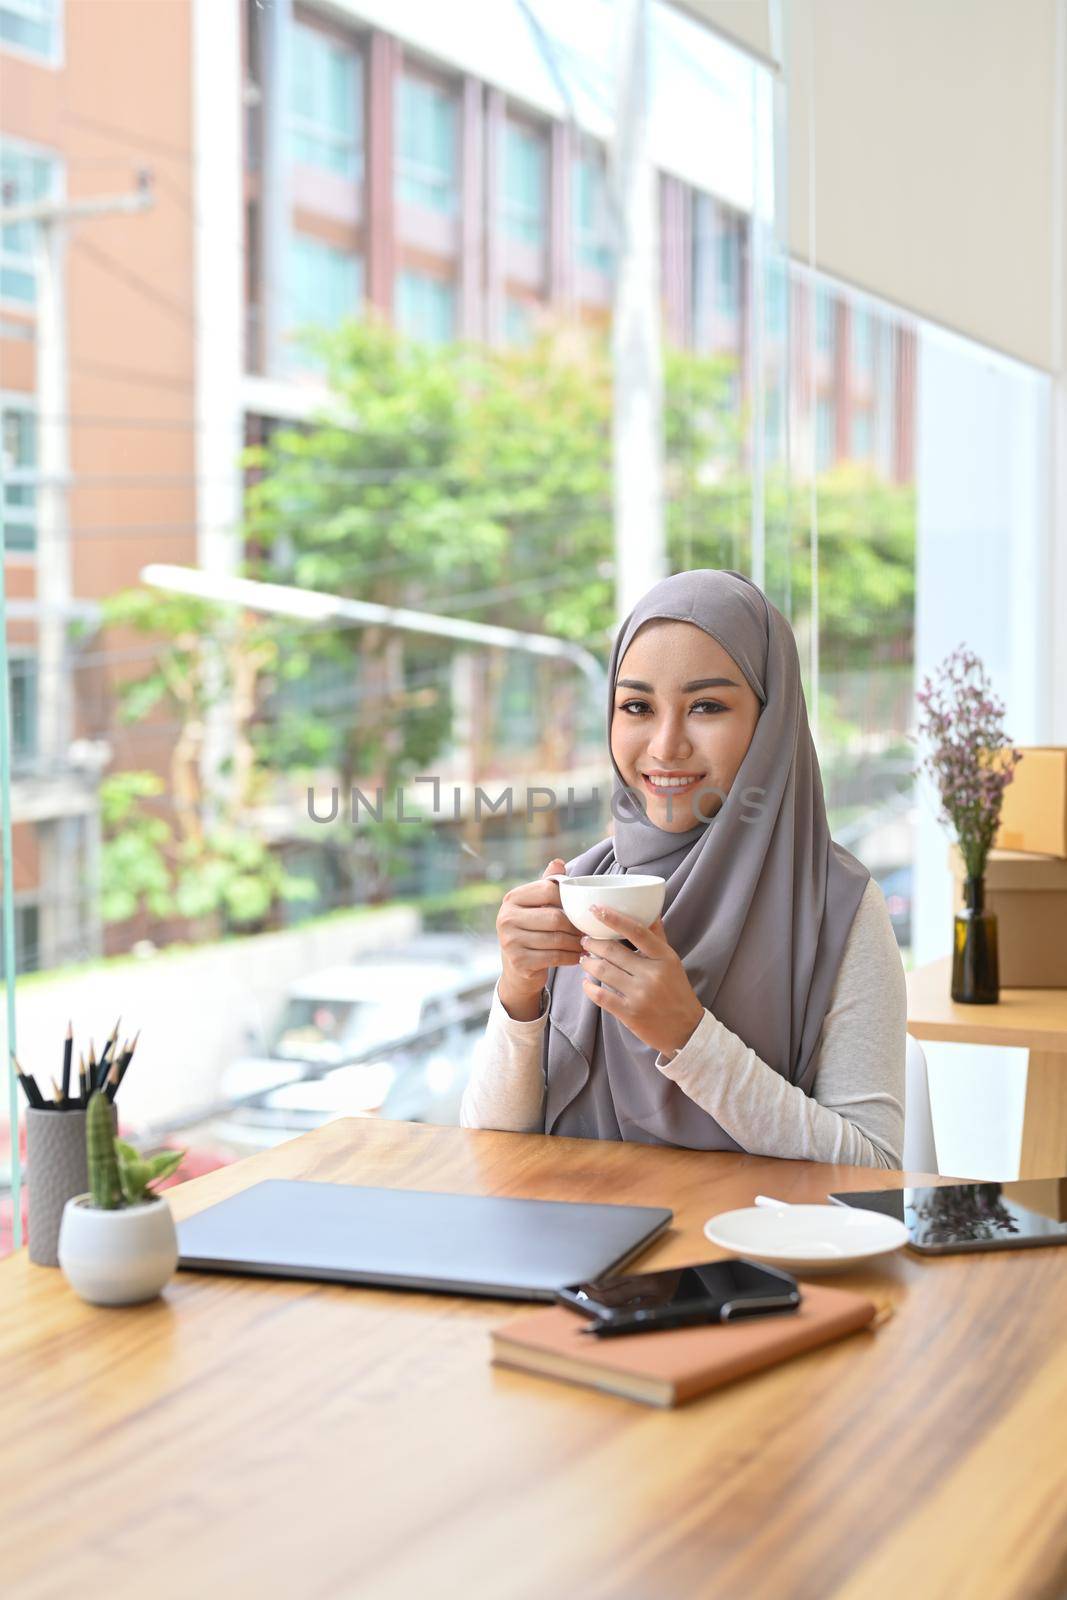 Smiling muslim businesswoman in hijab sitting in her office and enjoying morning coffee.